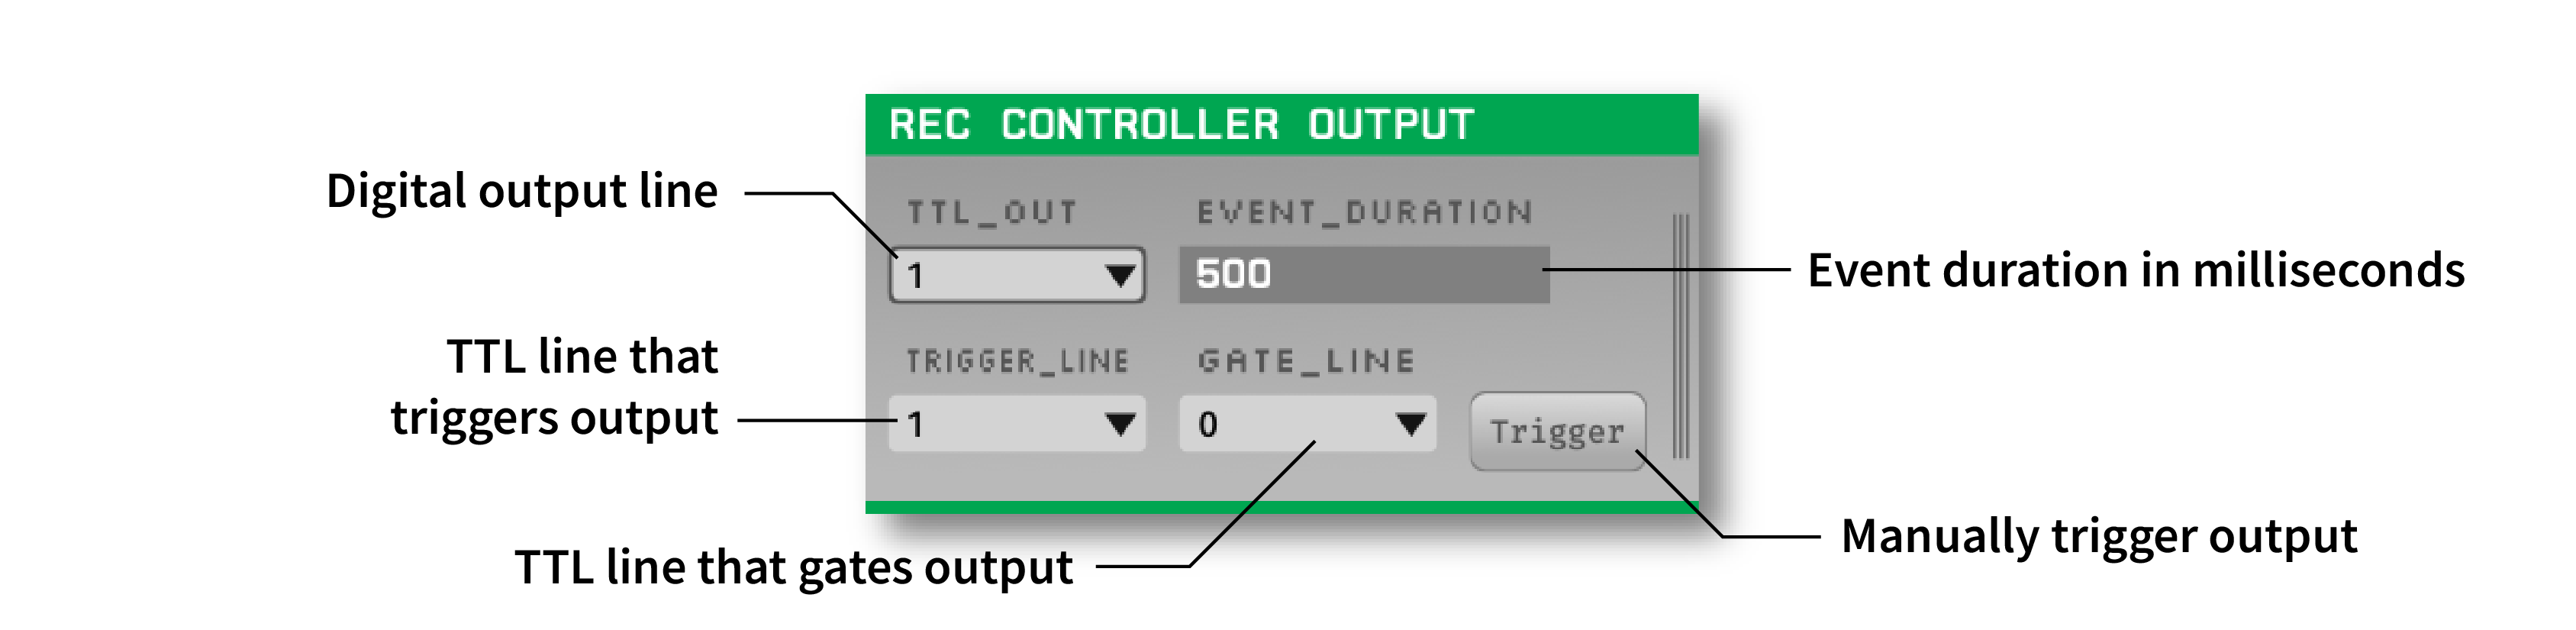 Annotated settings interface for the Rec Controller Output plugin